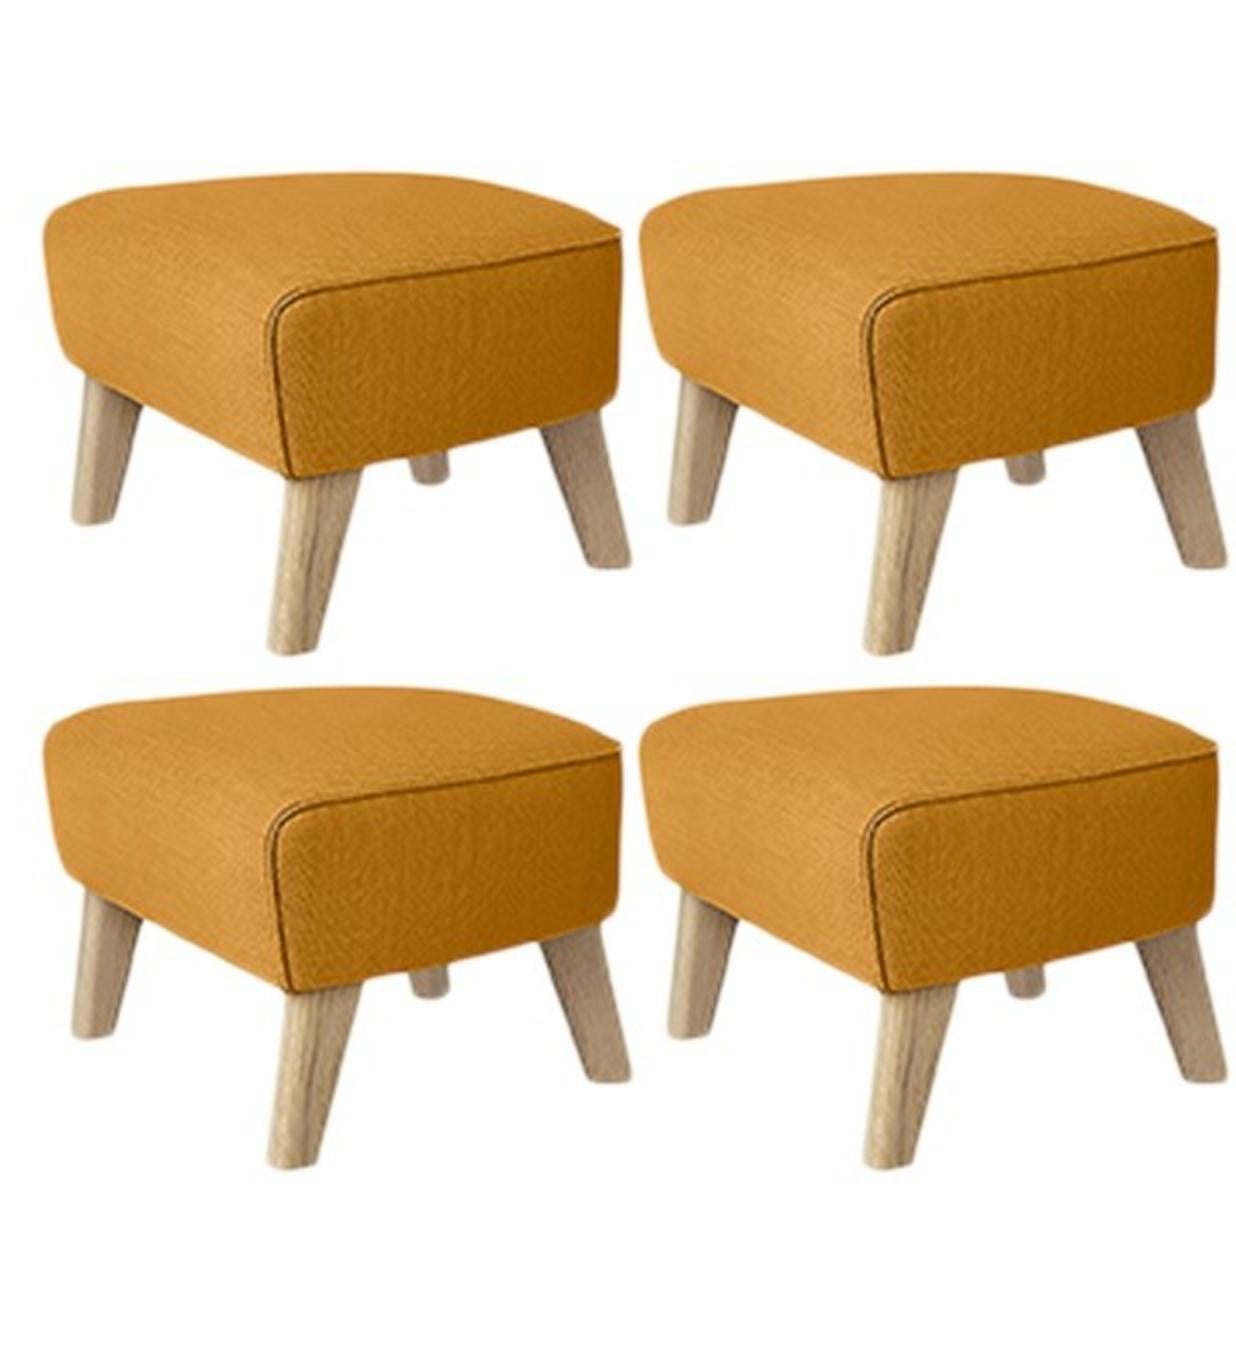 Set of 4 orange, natural oak raf simons vidar 3 my own chair footstool by Lassen.
Dimensions: W 56 x D 58 x H 40 cm 
Materials: Textile
Also available: Other colors available.

The my own chair footstool has been designed in the same spirit as